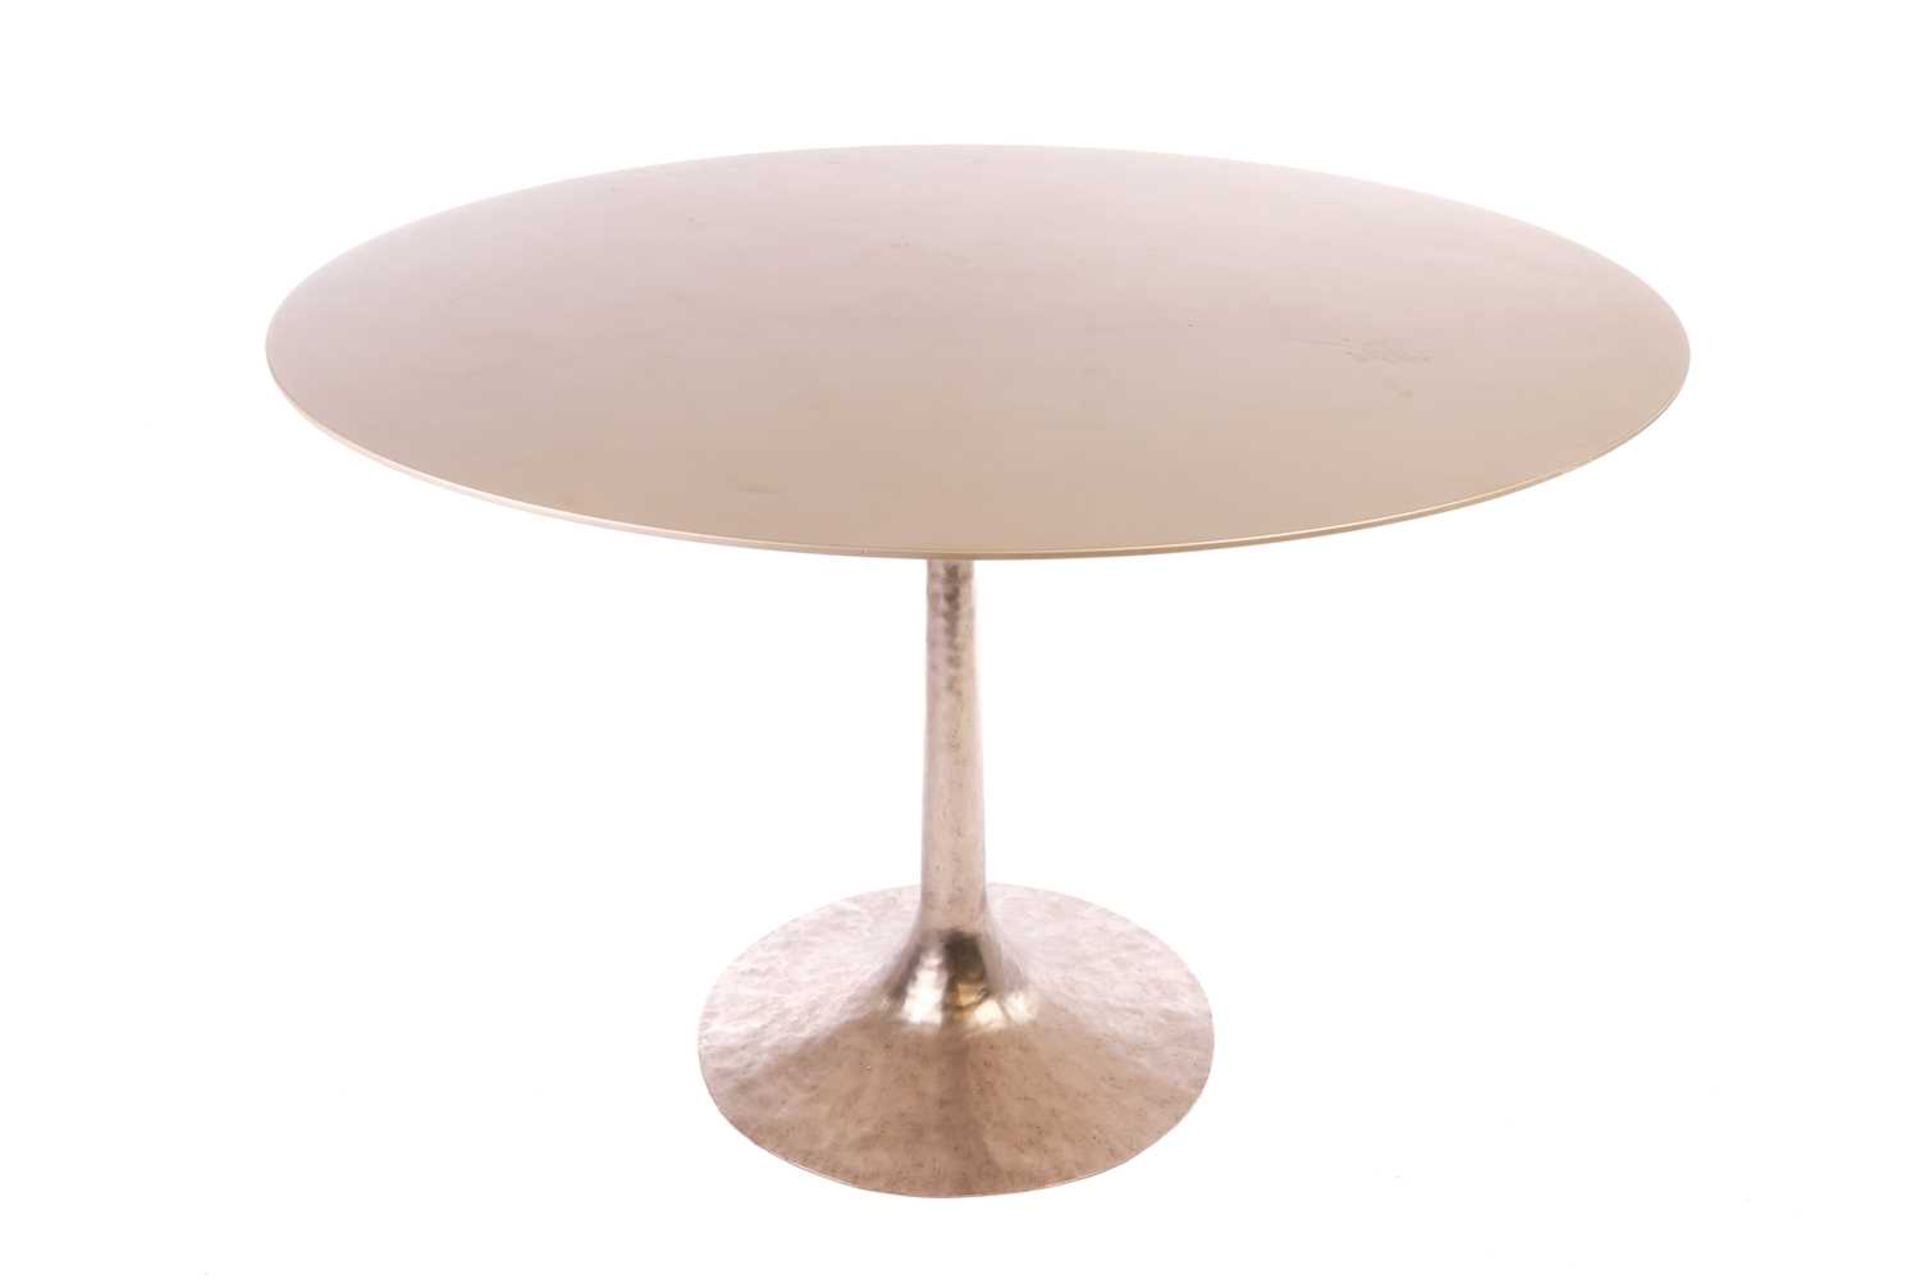 A Julian Chichester 'Dakota' Dining Table, the gold effect finish circular top on a hand-hammered ch